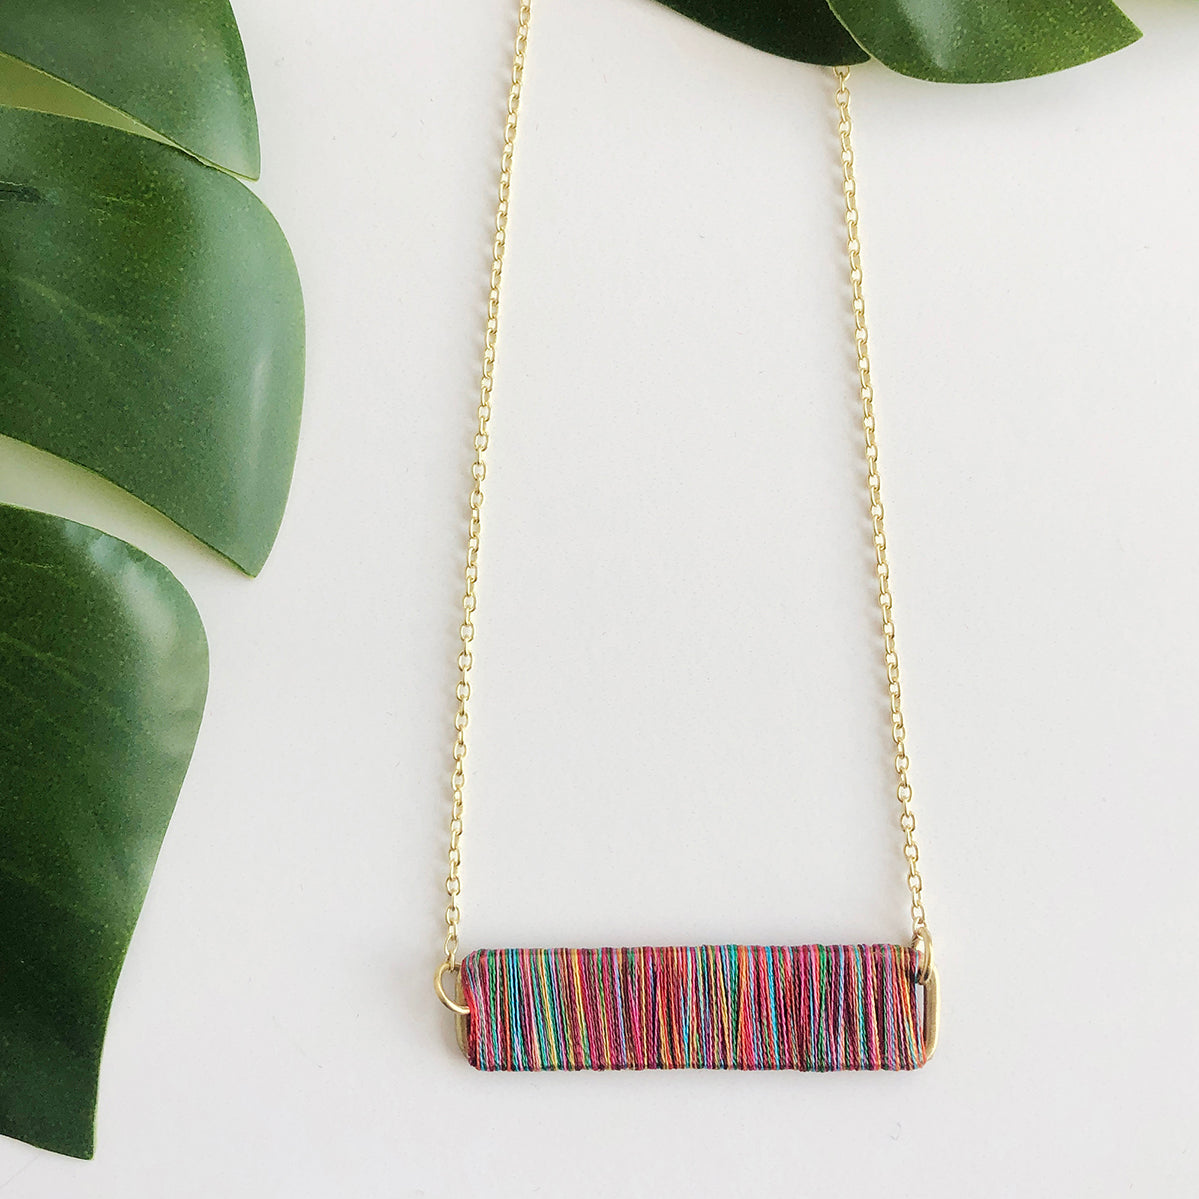 Up close view of the Raja Rainbow Pendant Necklace